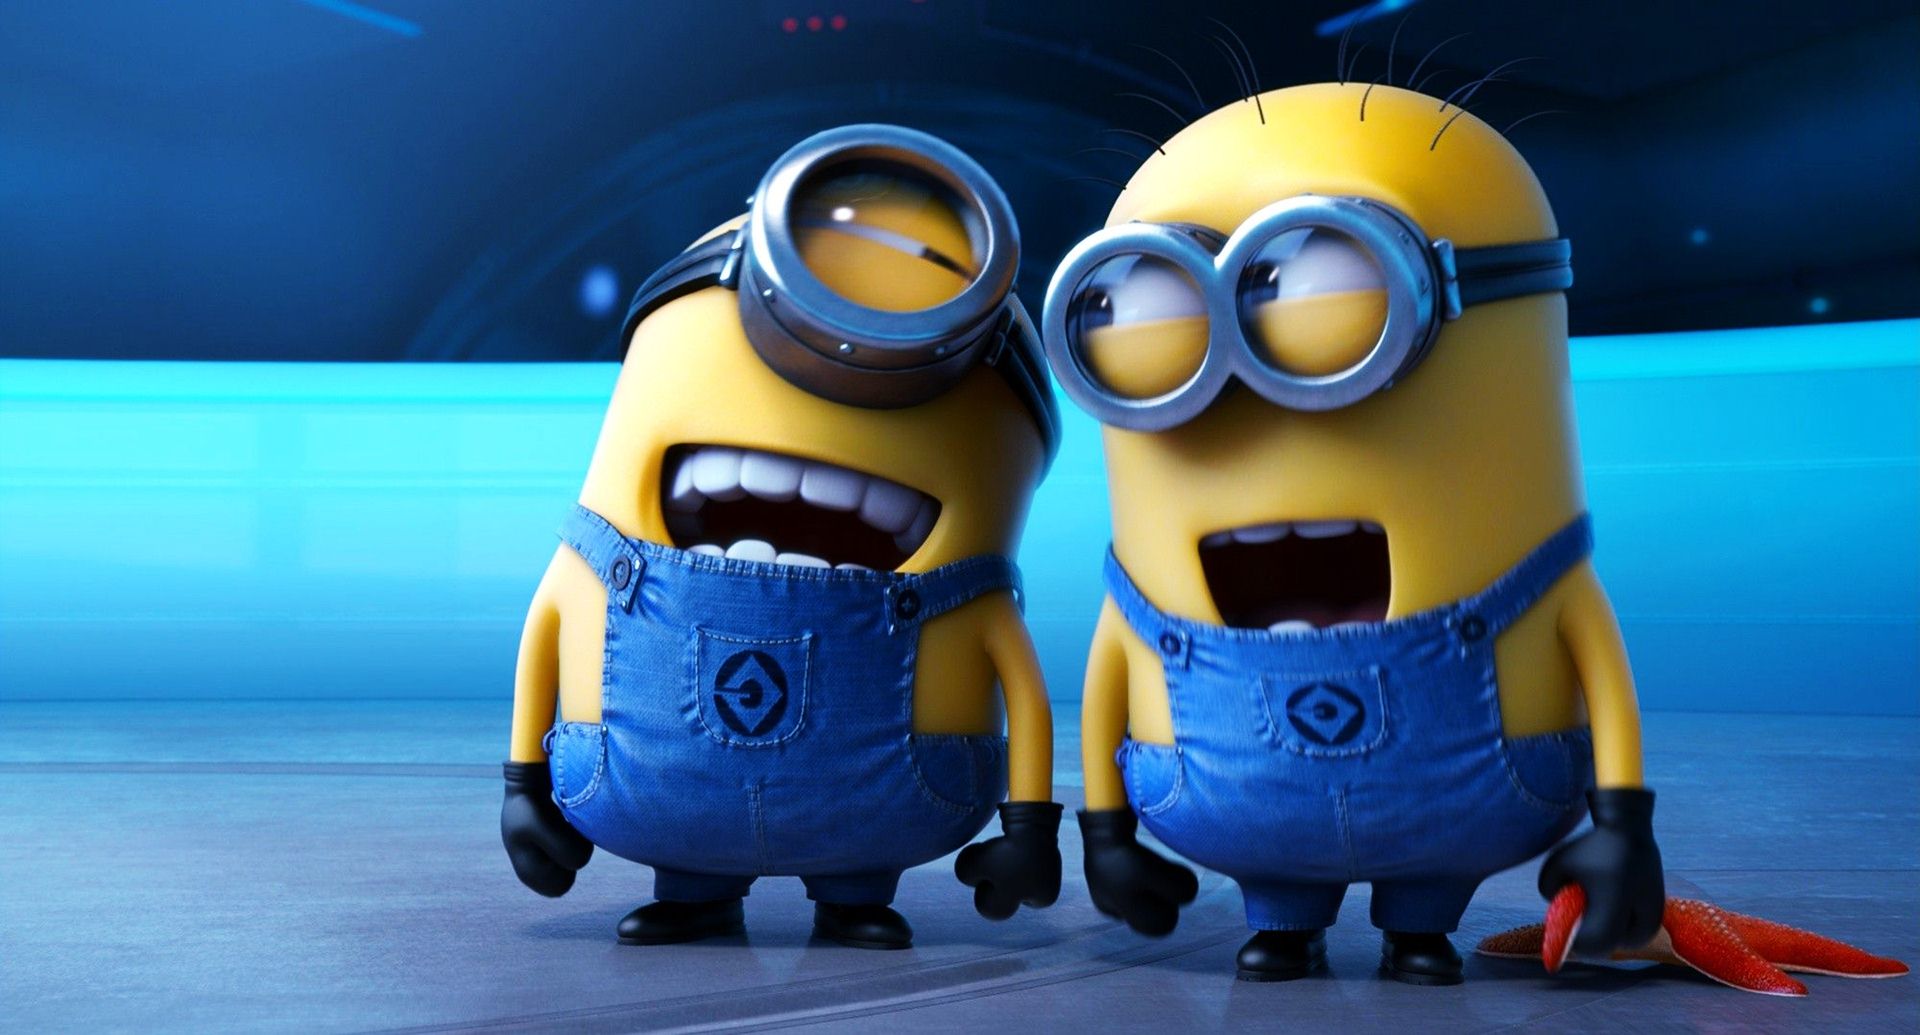 Image of funny hd wallpapers of minions